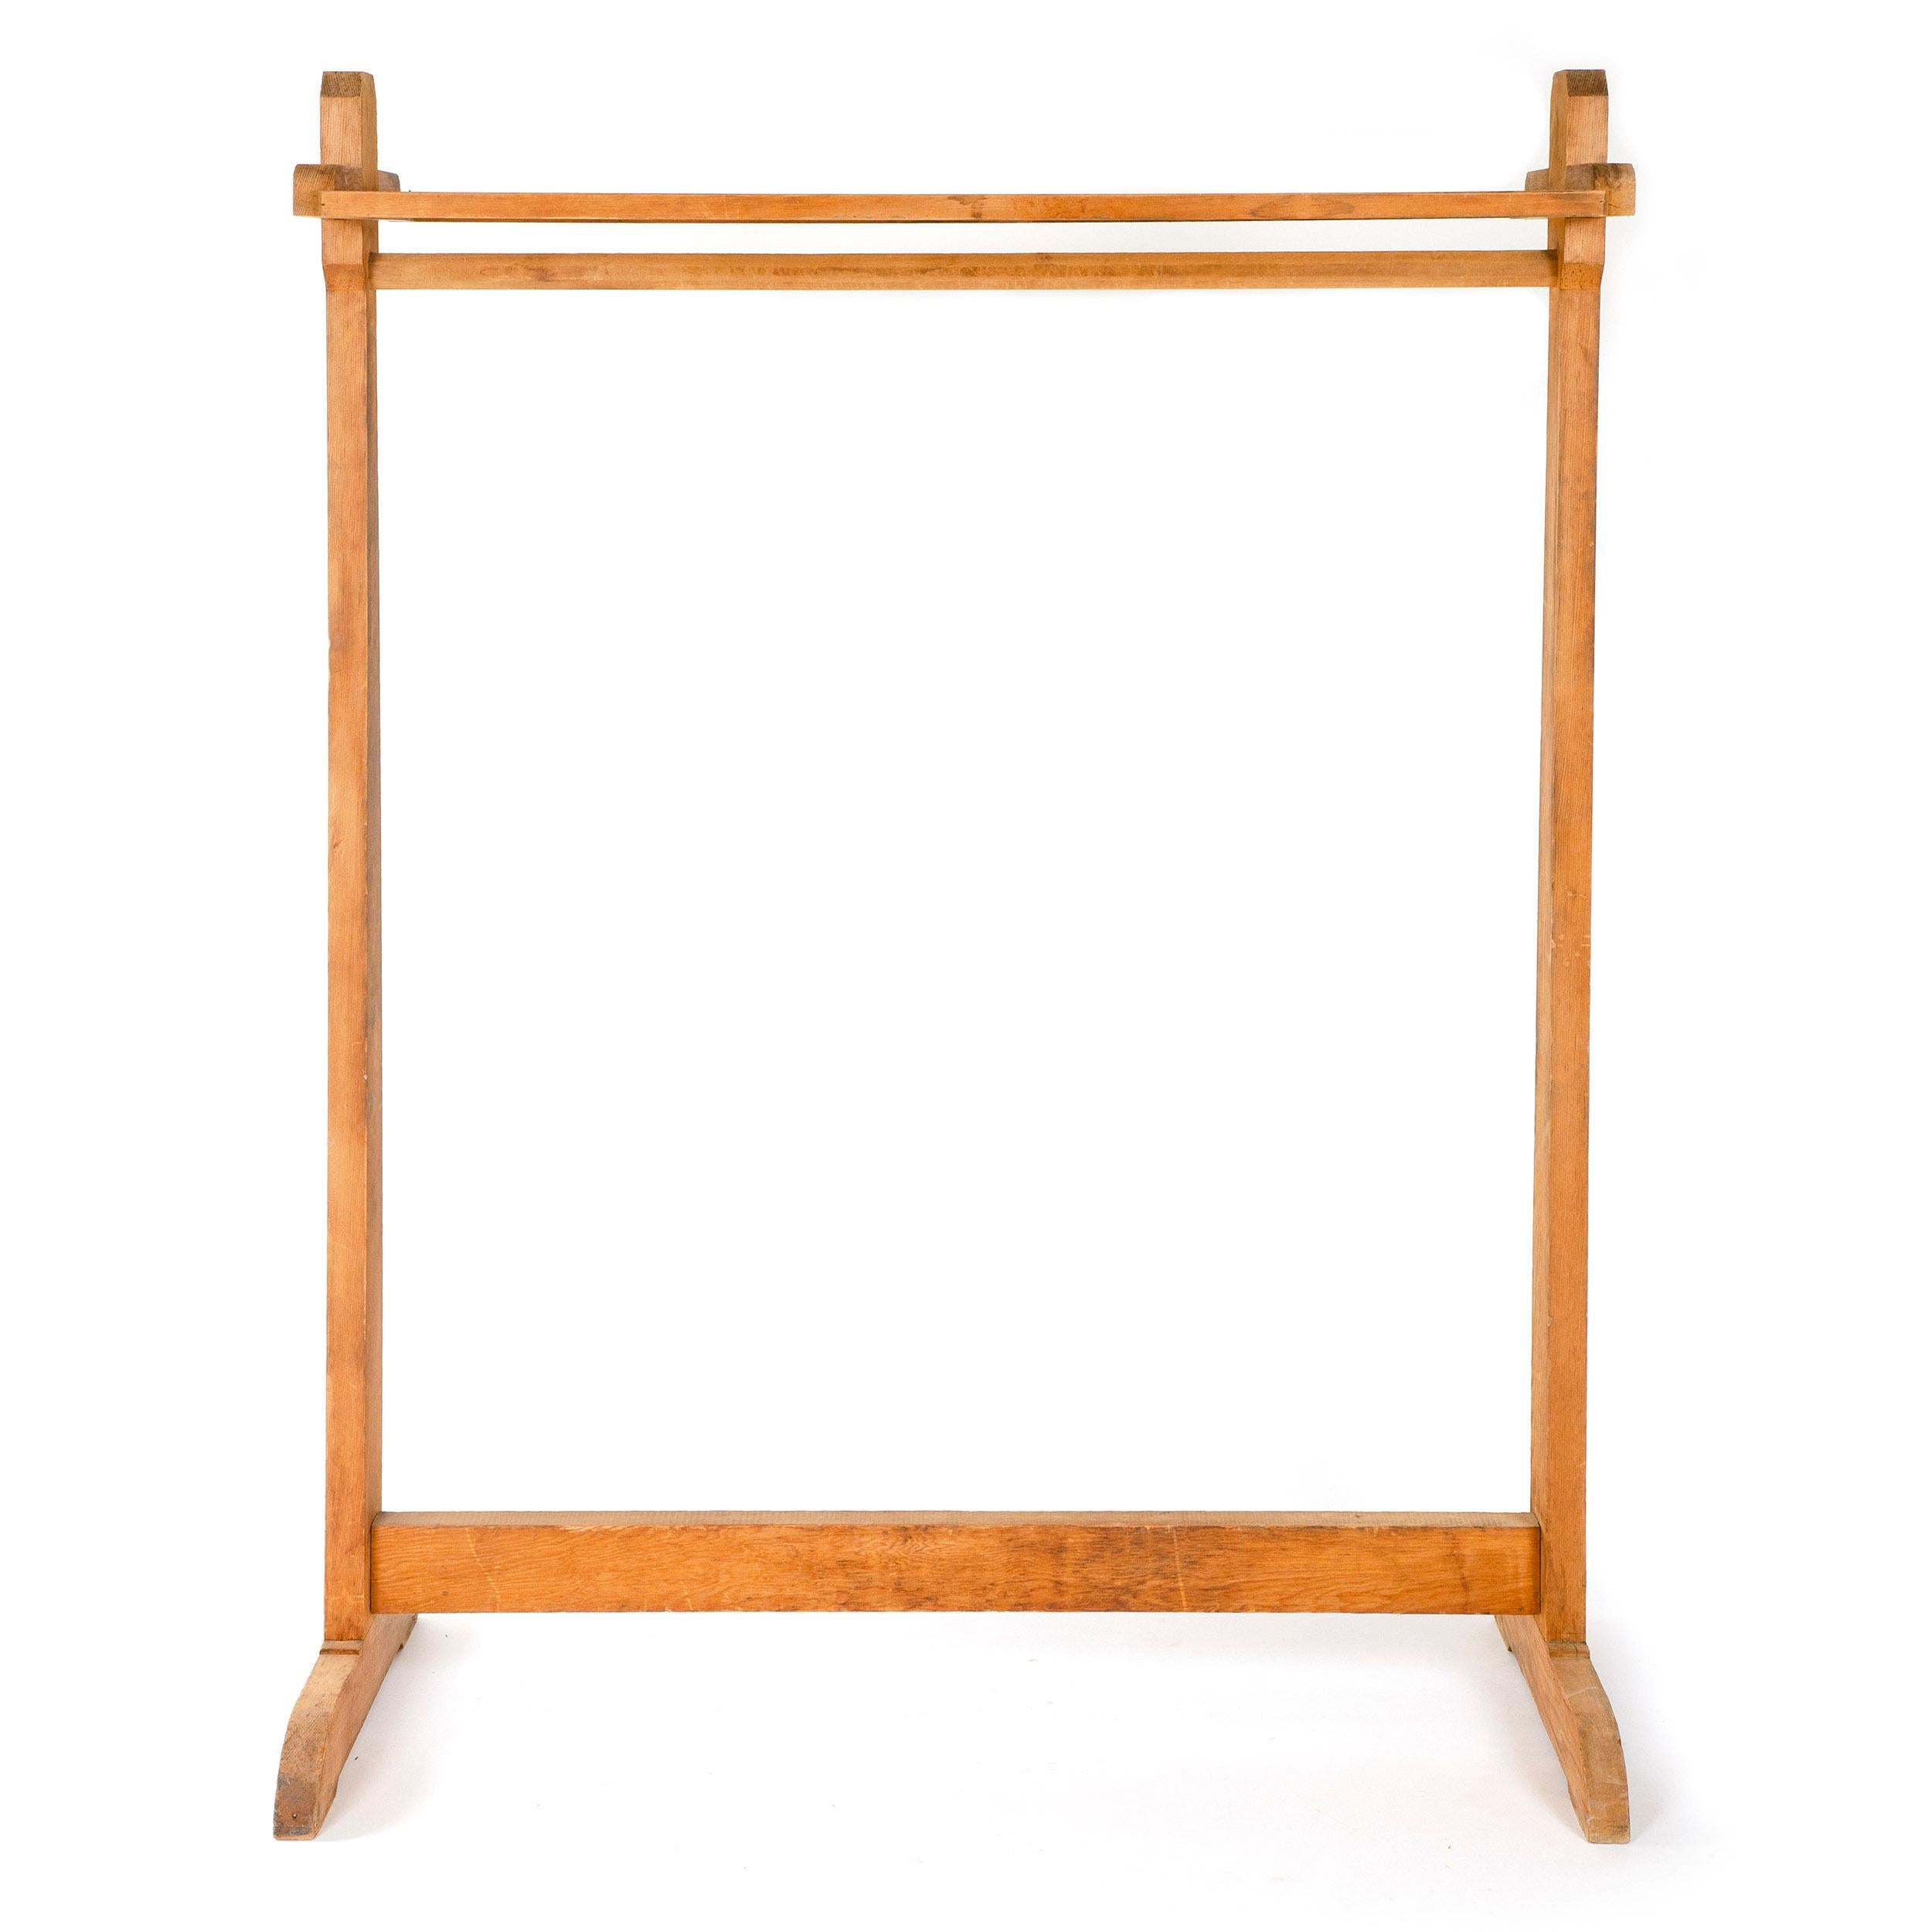 A simple, sturdy, and well made utilitarian clothing rack of solid pine set on a shoe foot base. The thick upright stiles form supporting sides for a slatted rack, a shaped pole for hanging articles, and a lower stretcher nicely tenoned through the